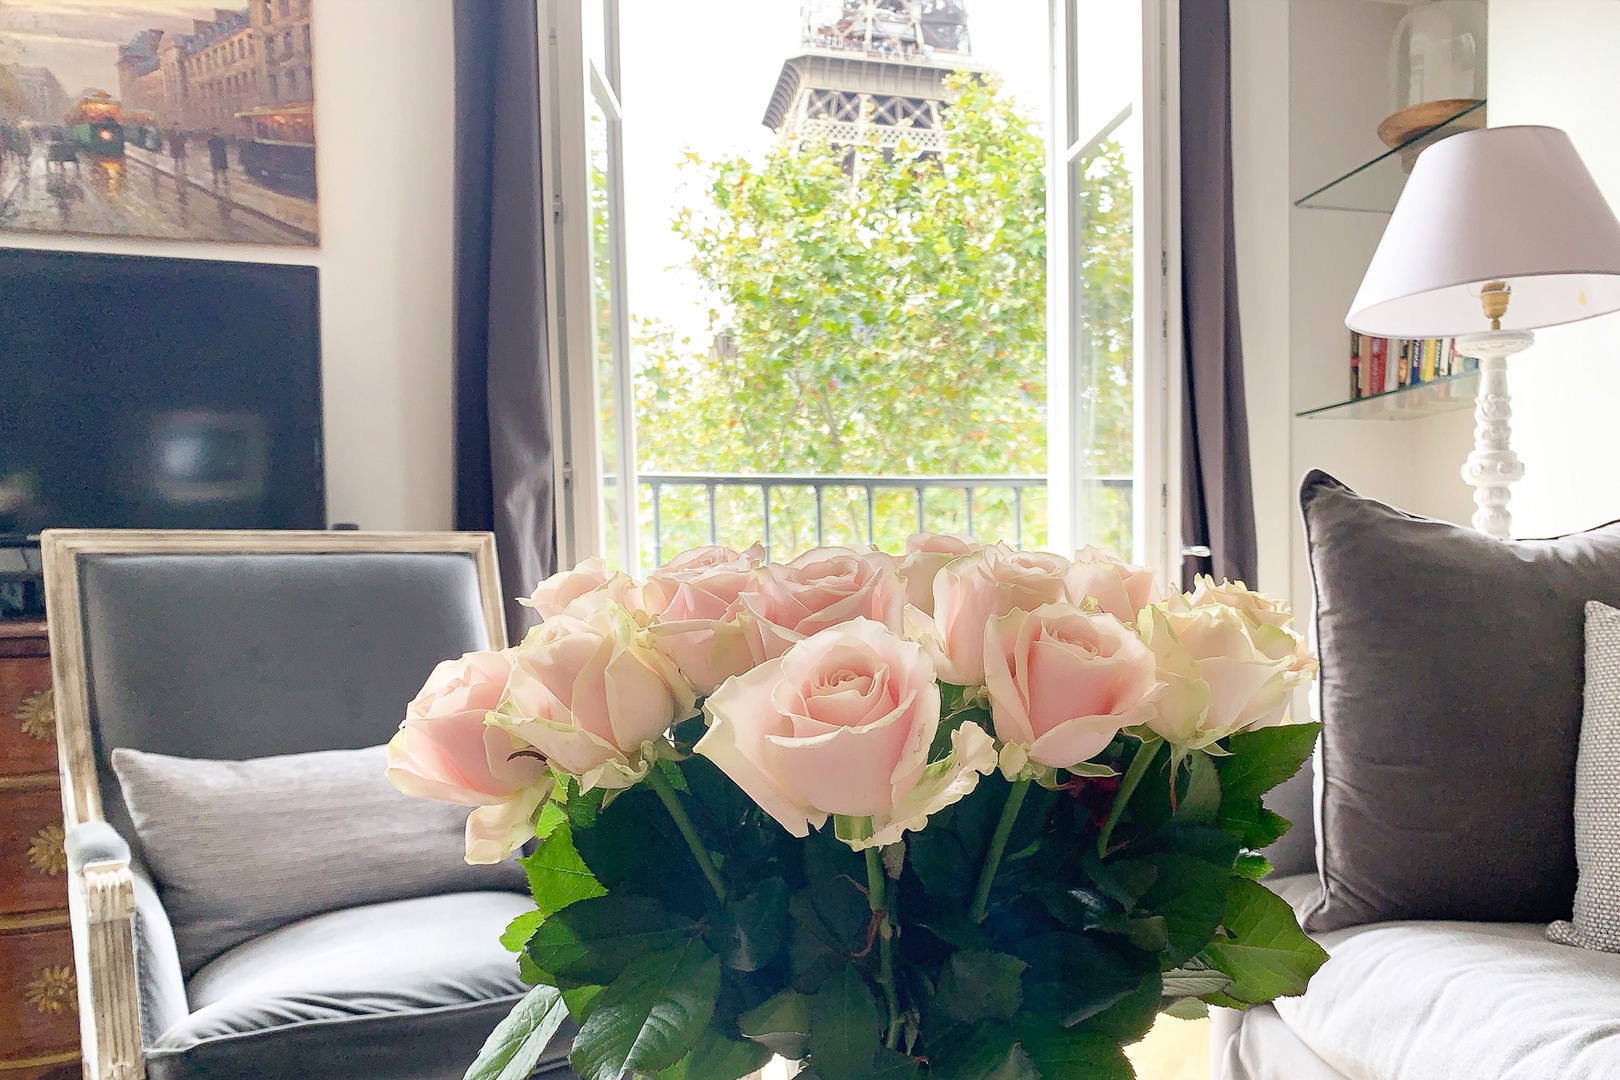 The perfect view for a relaxing stay in Paris.